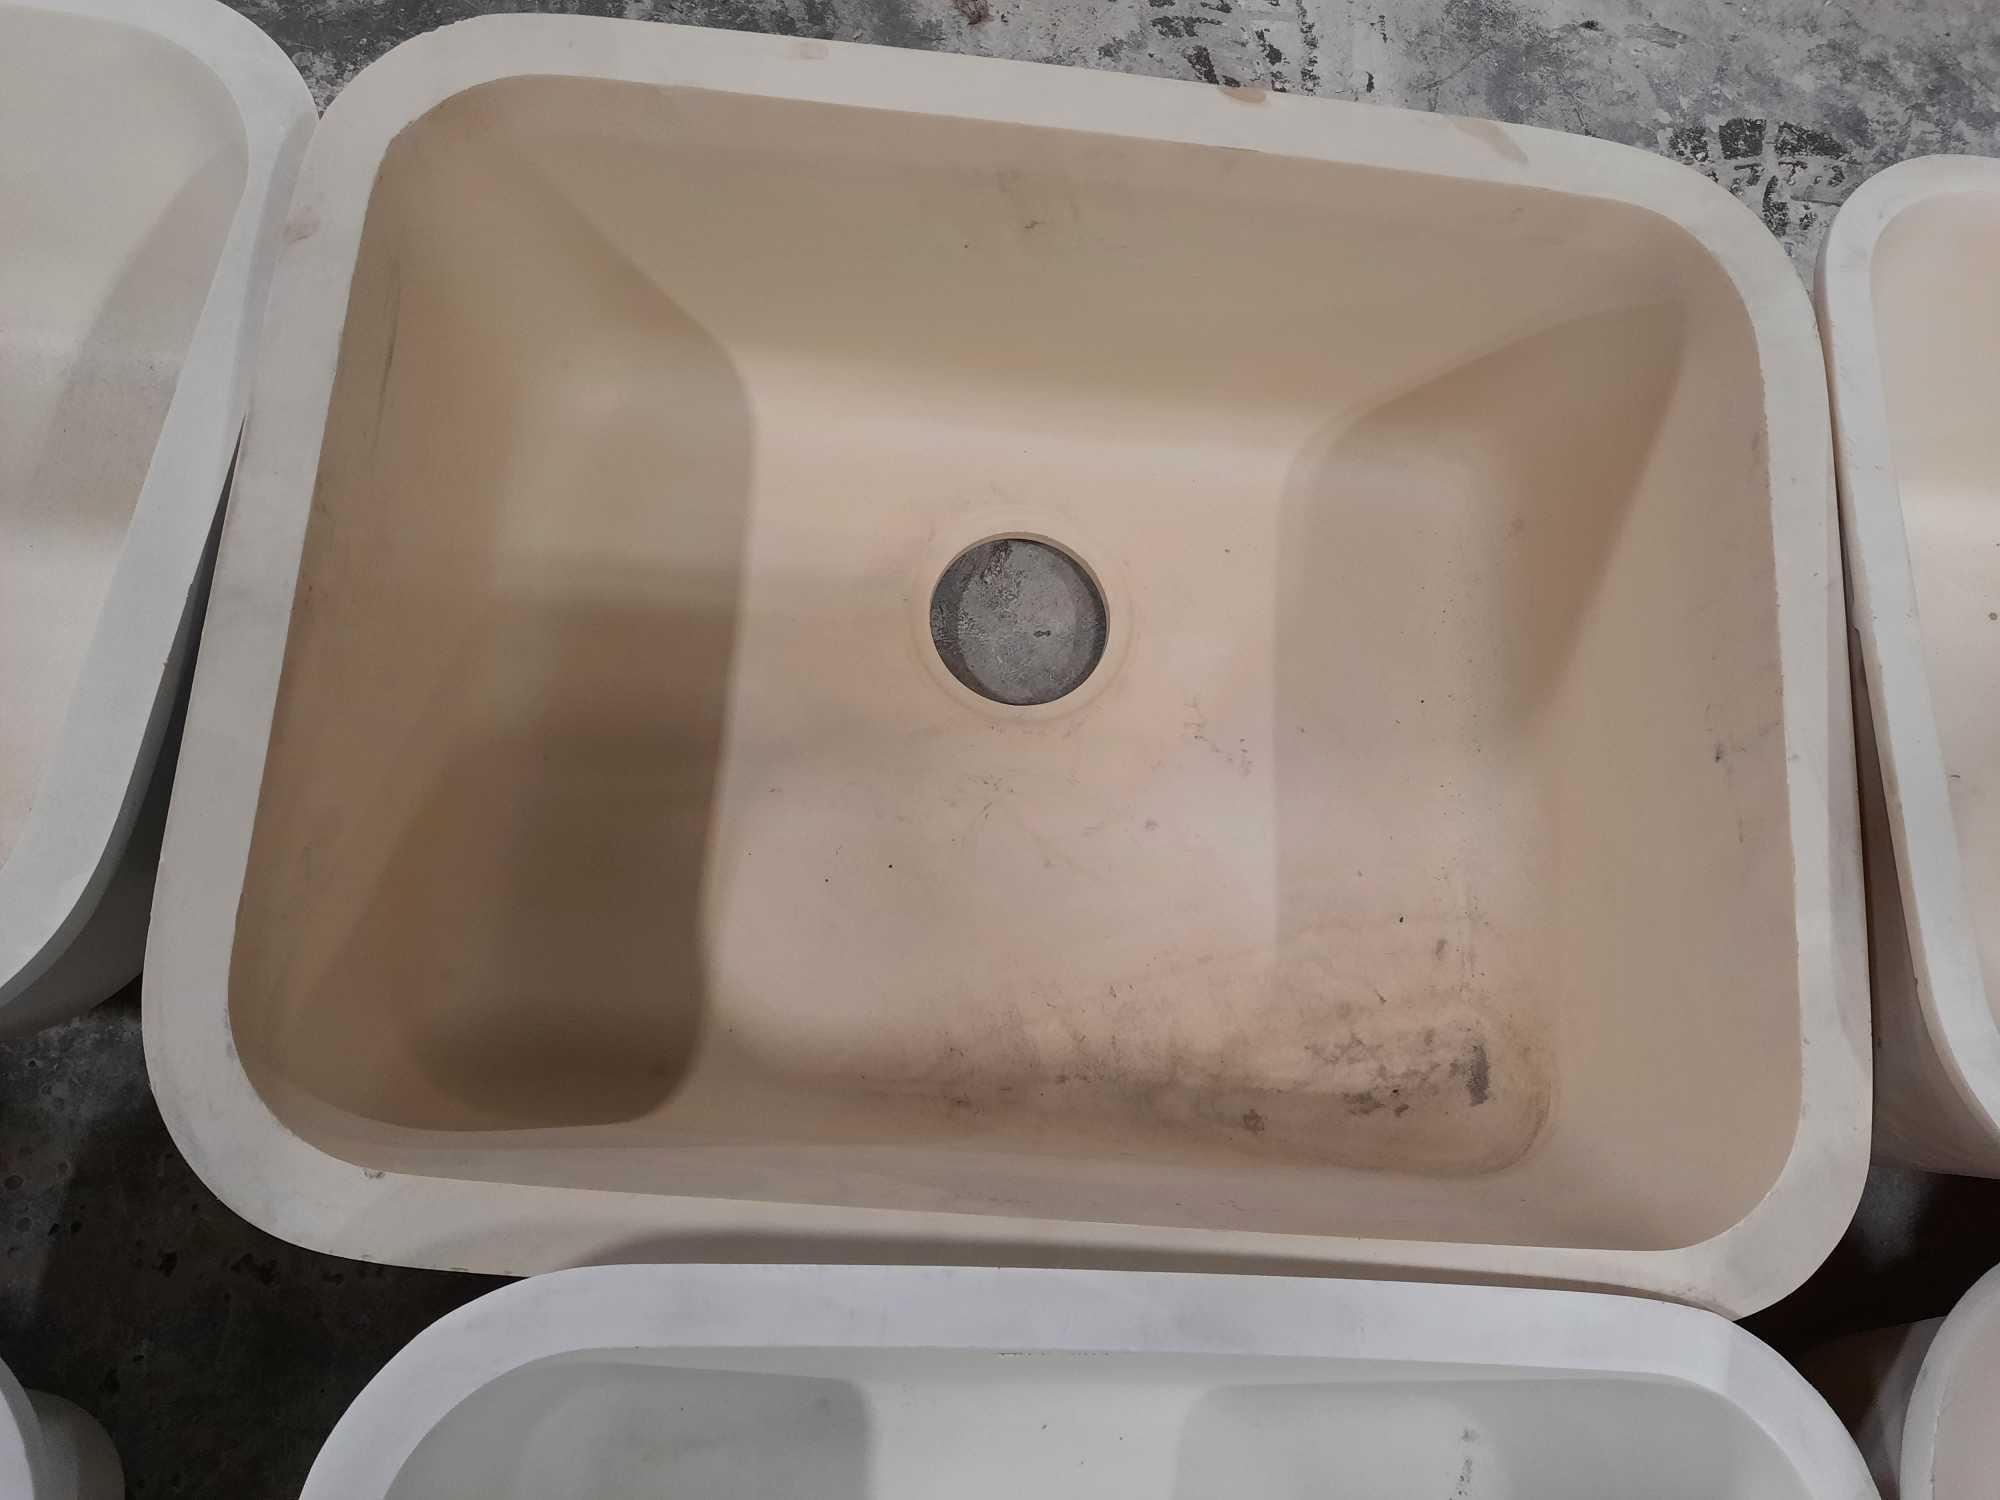 SOLID SURFACE SINKS